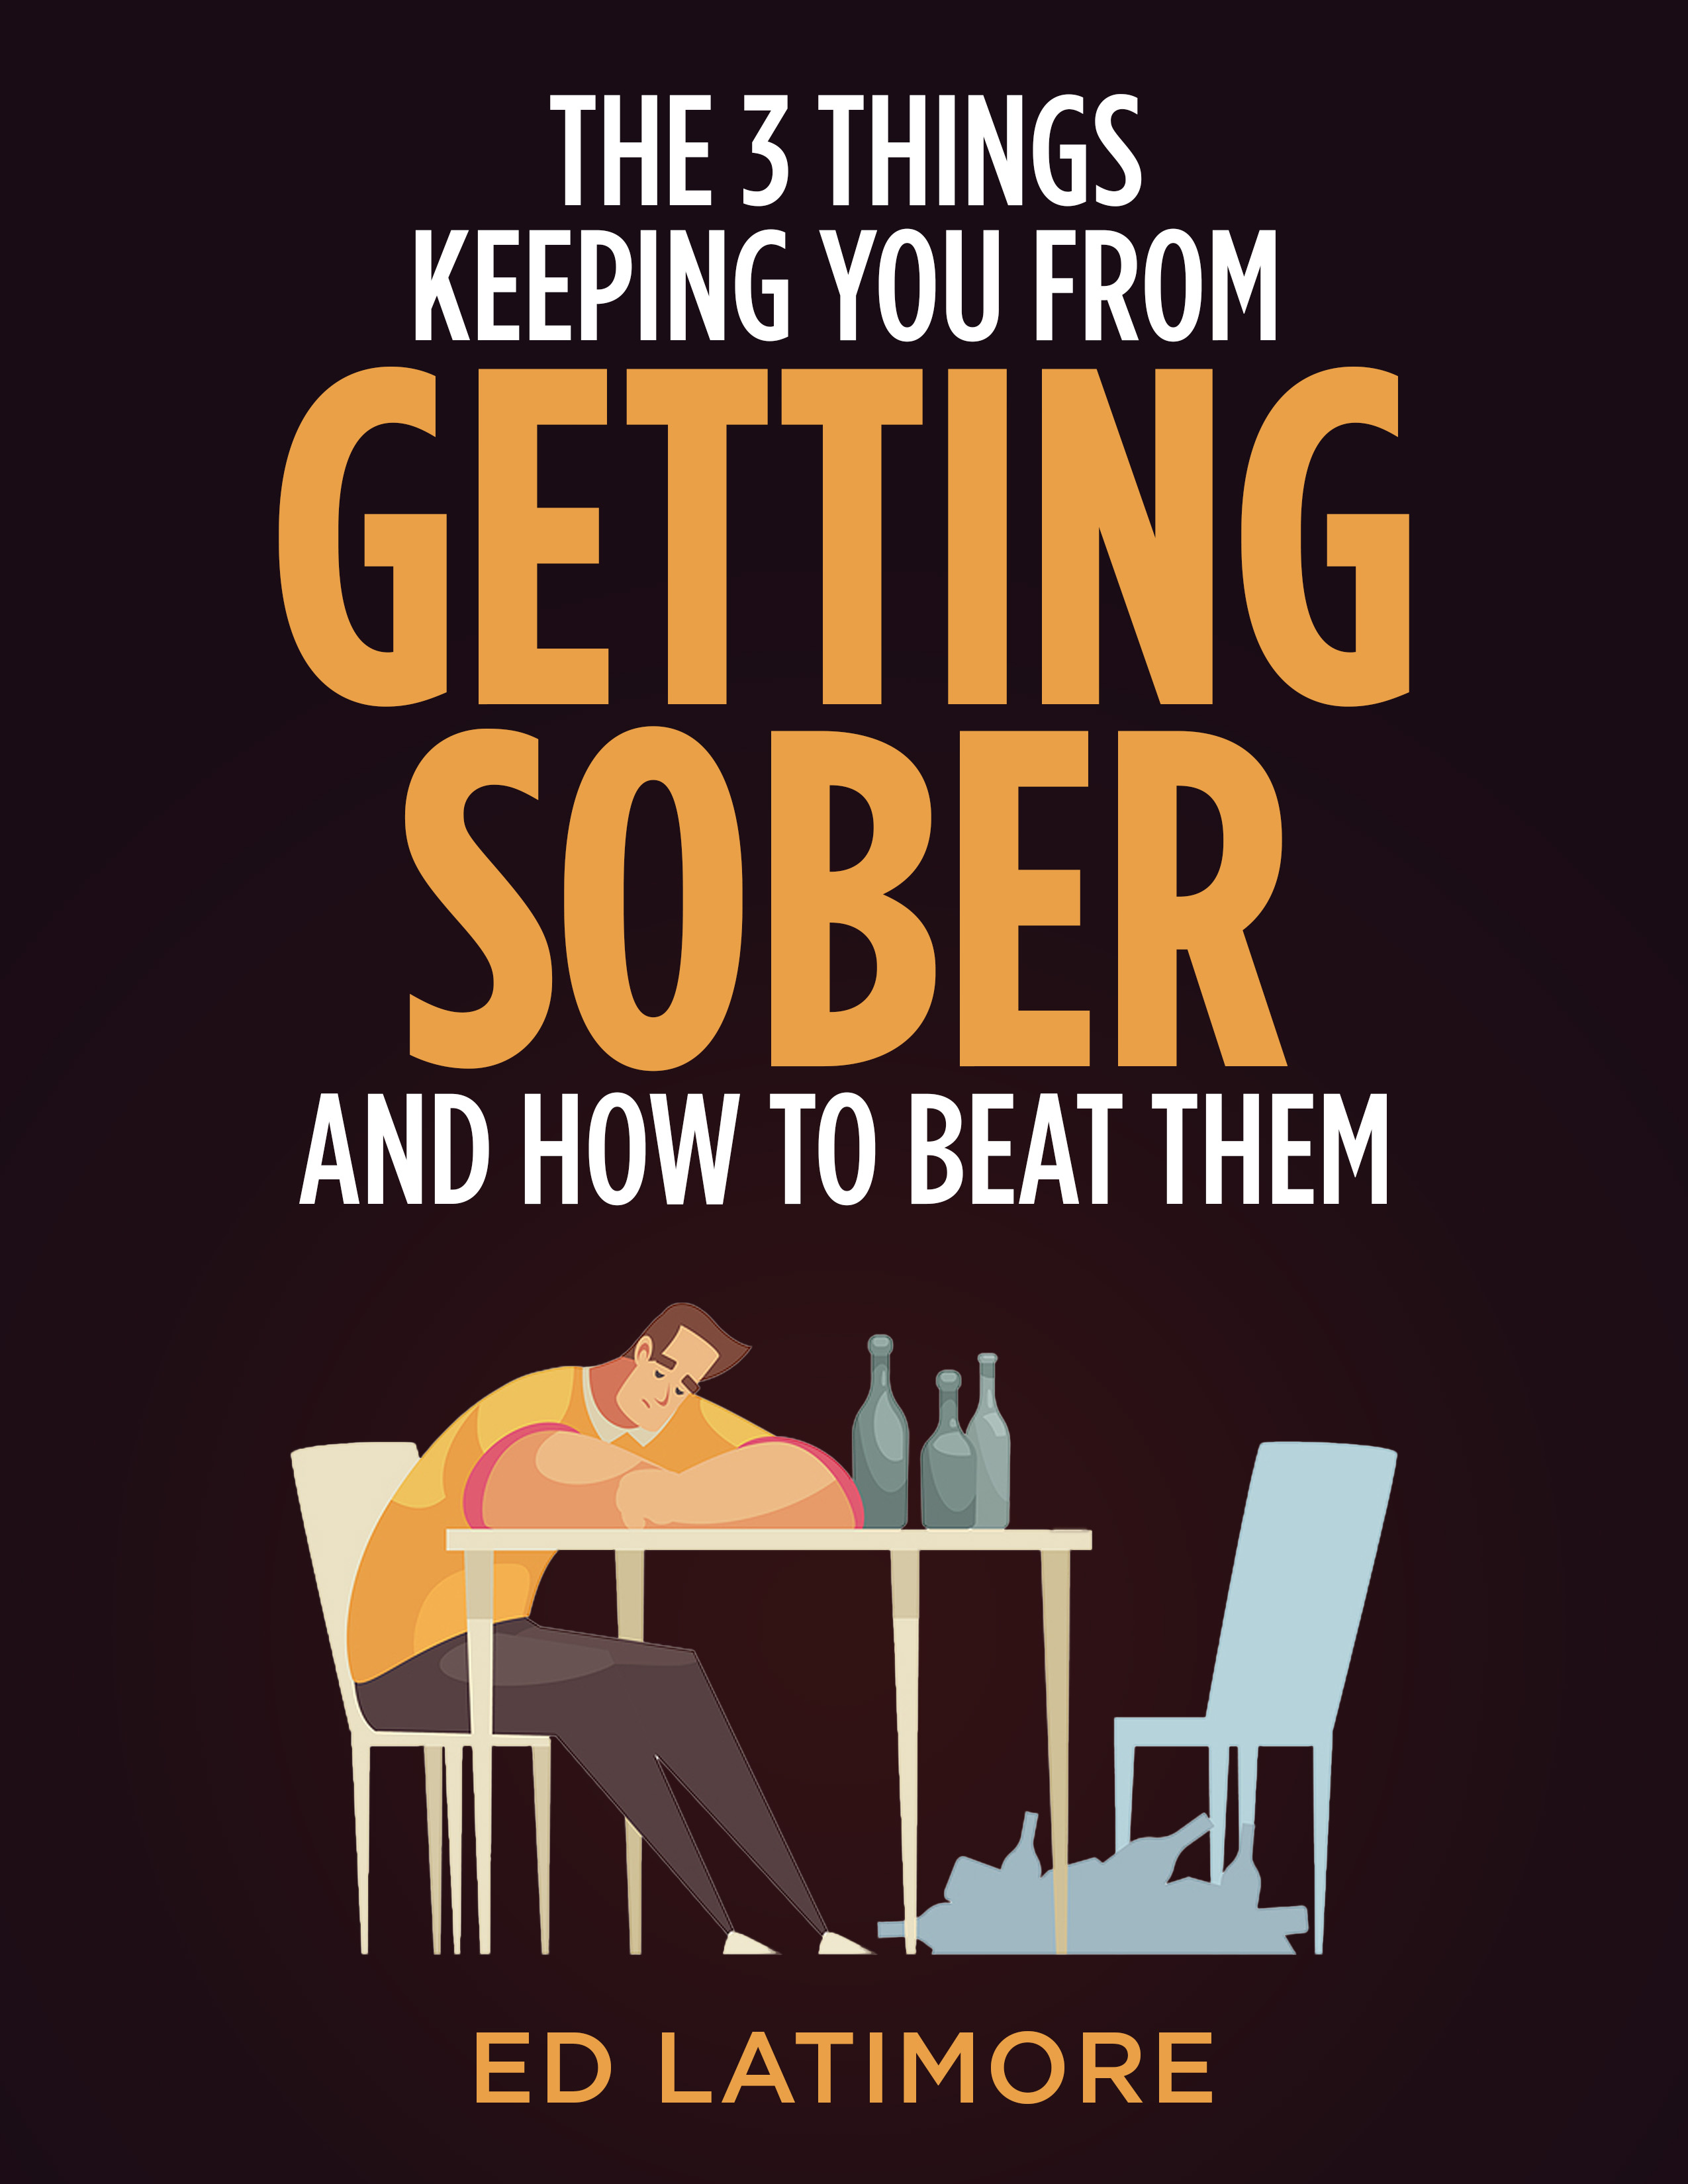 3 things keeping you from getting sober